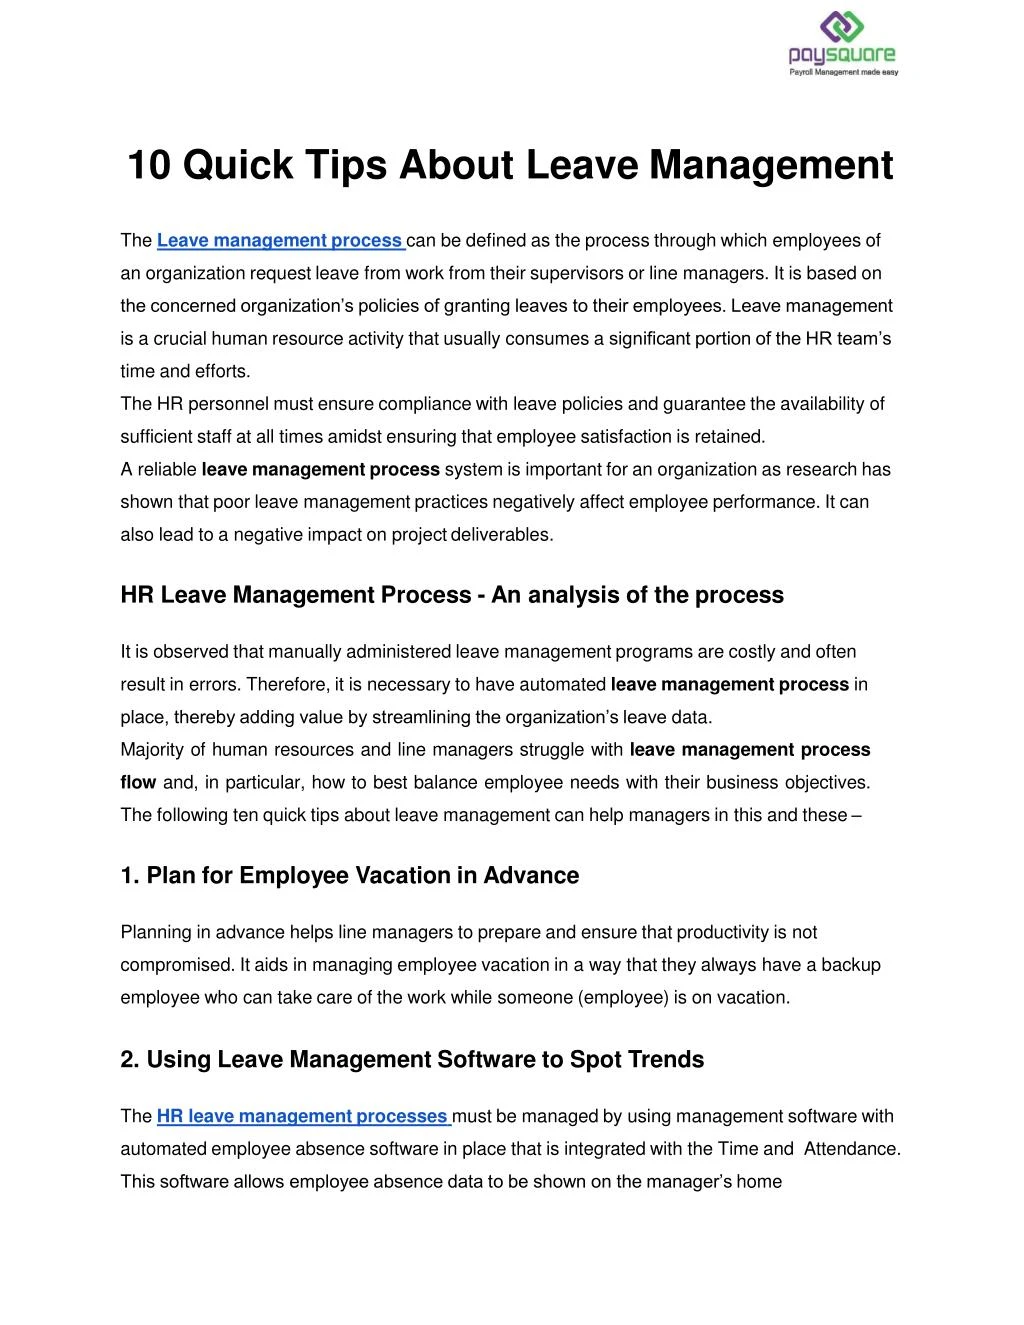 10 quick tips about leave management